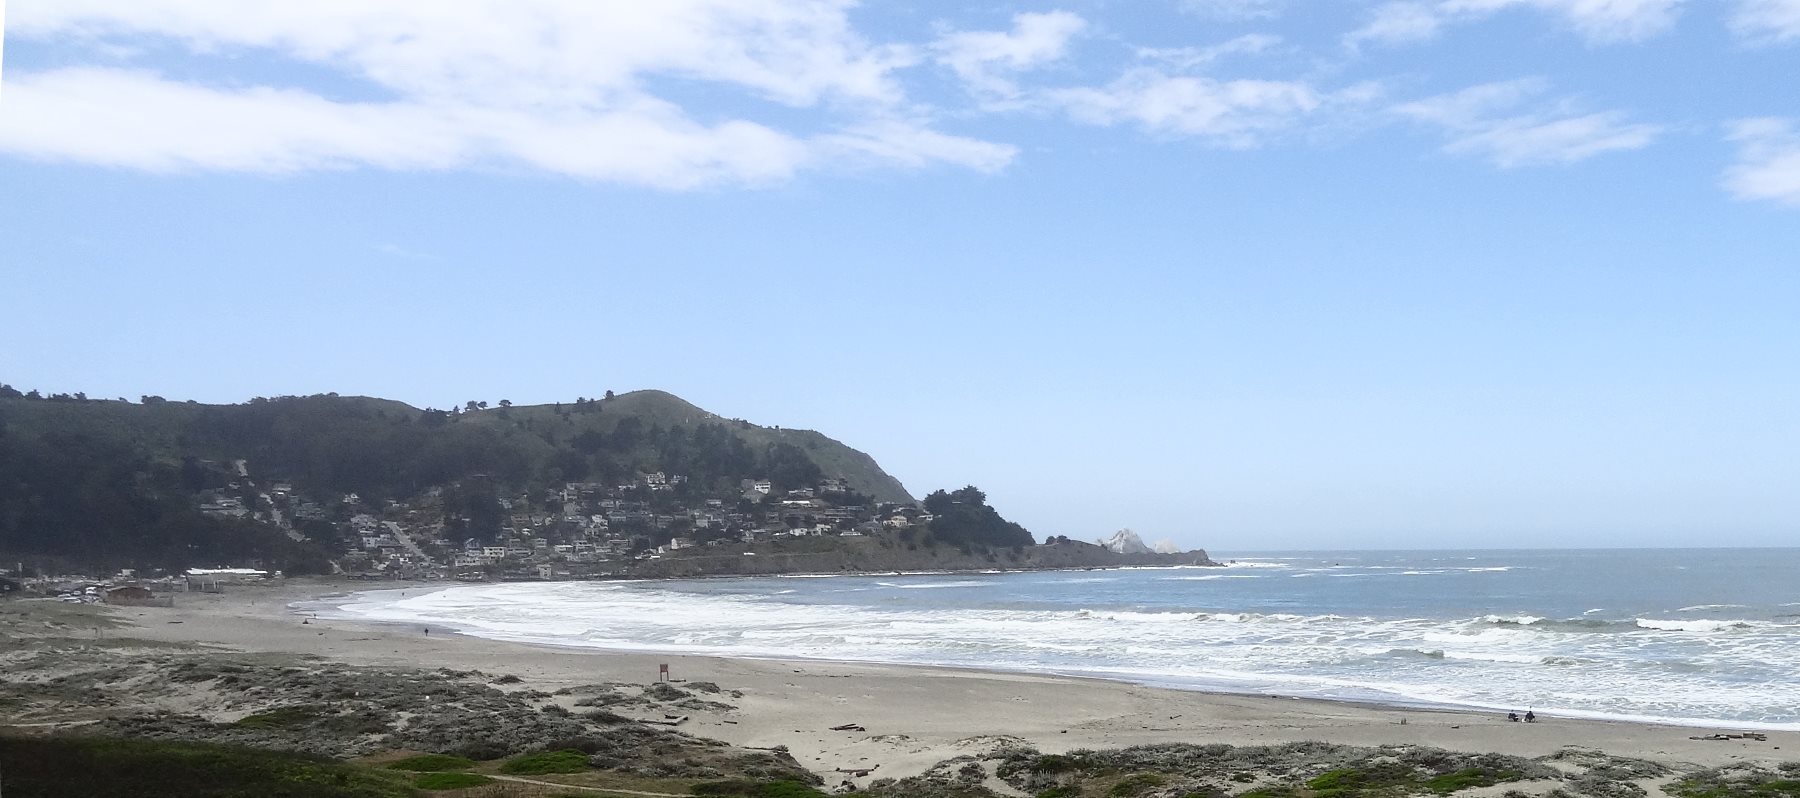 South of San Francisco, South of Daly City, here the land is folded as the San Andreas enters the ocean at Pacifica. This is the start of the San Mateo Coast. It is a rough place, open directly to every point in the Big Pacific Ocean.